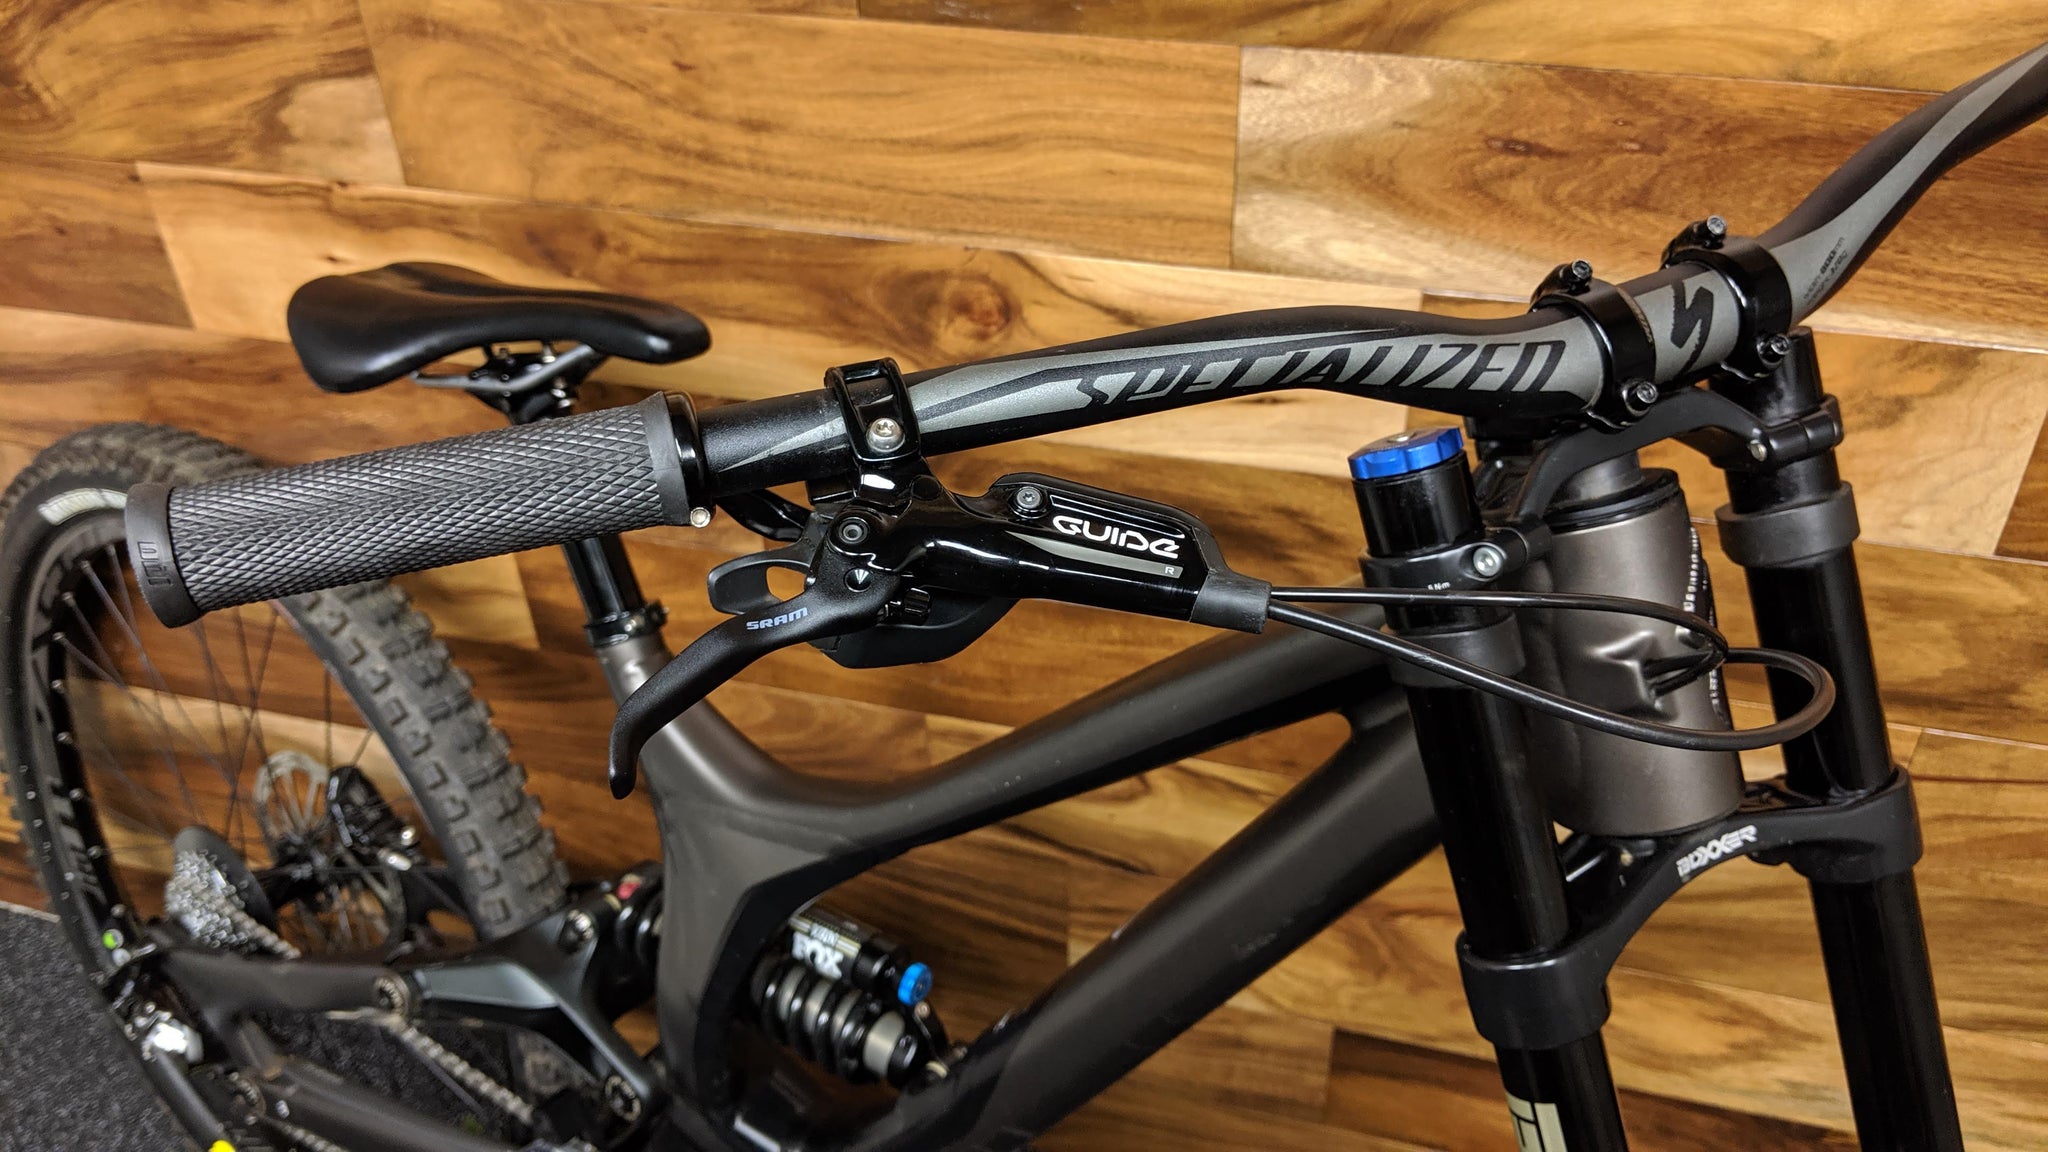 2017 SPECIALIZED DEMO 8 I ALLOY 27.5"